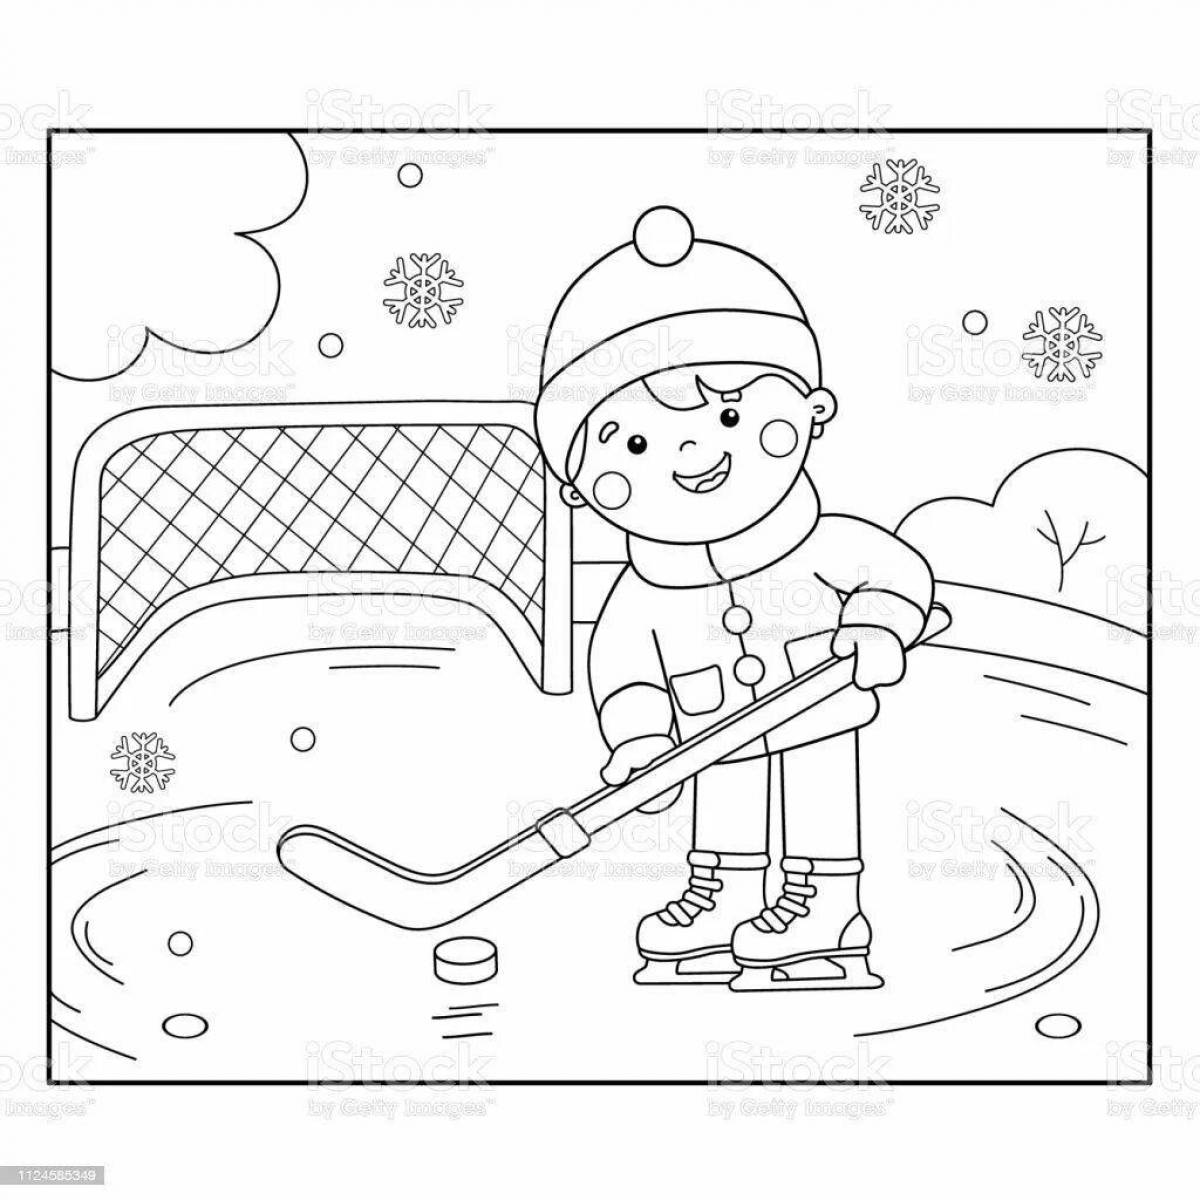 Colourful winter sports coloring book for children